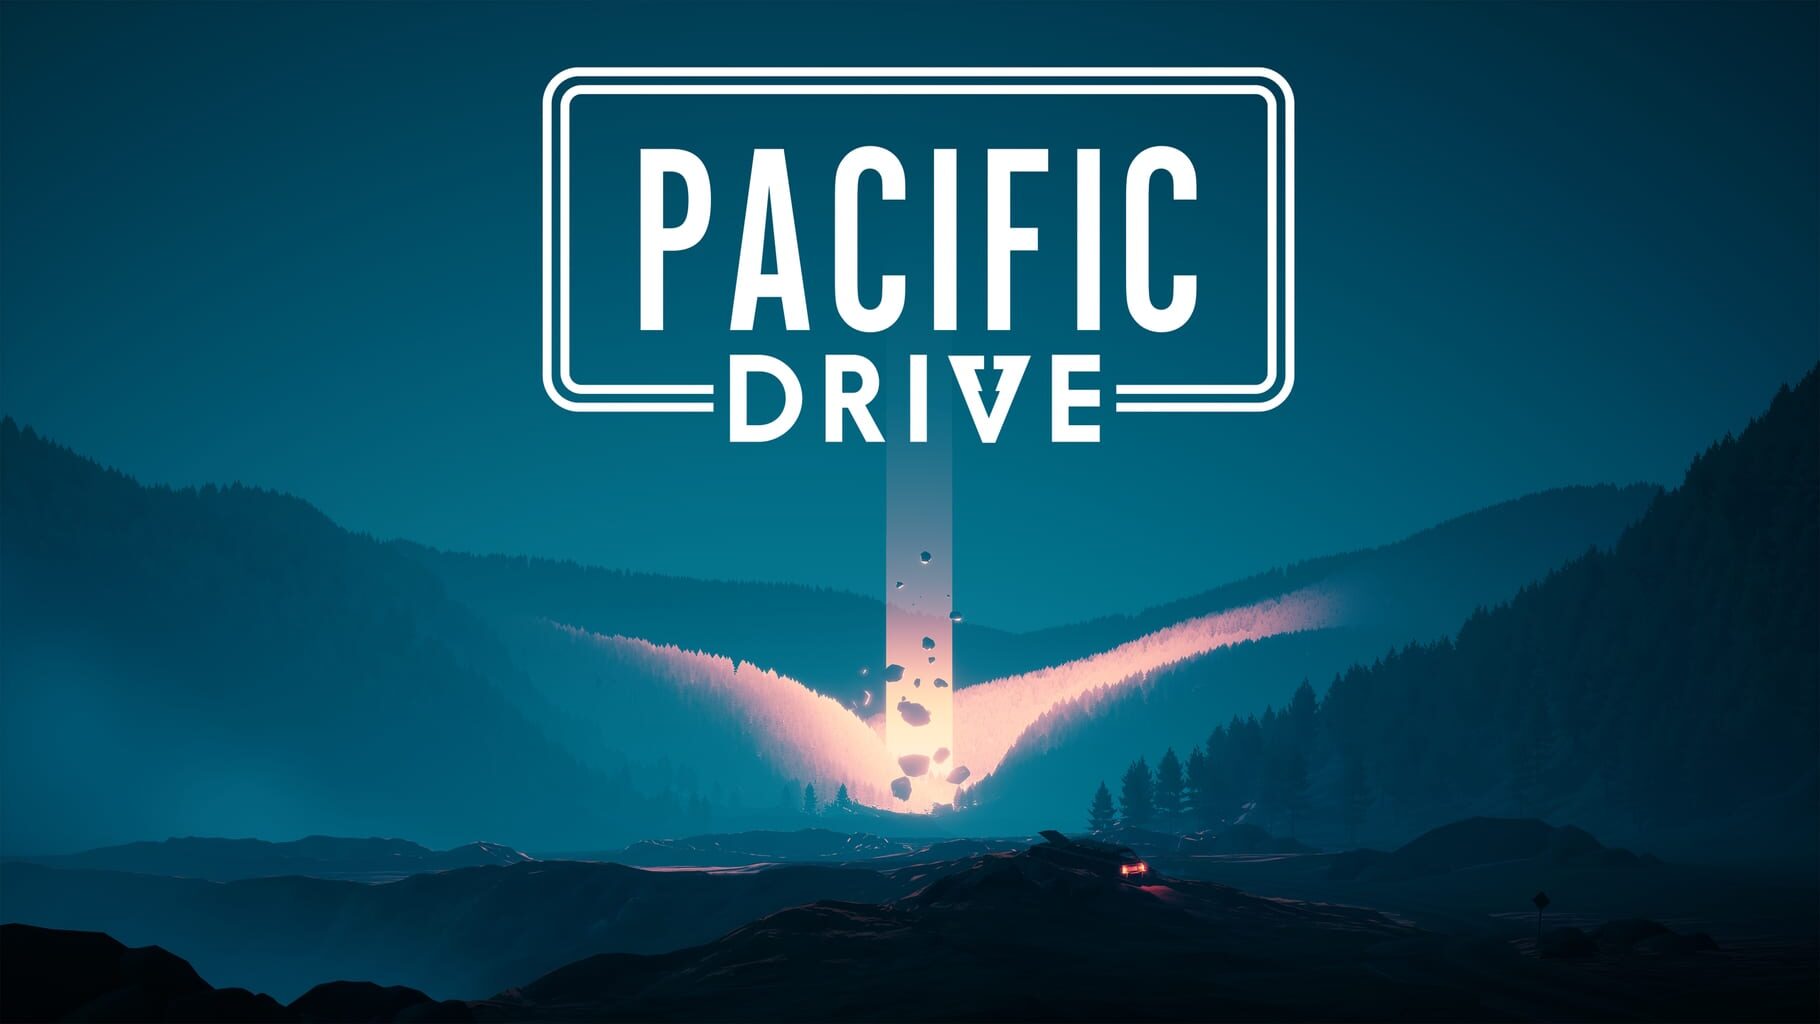 Artwork for Pacific Drive